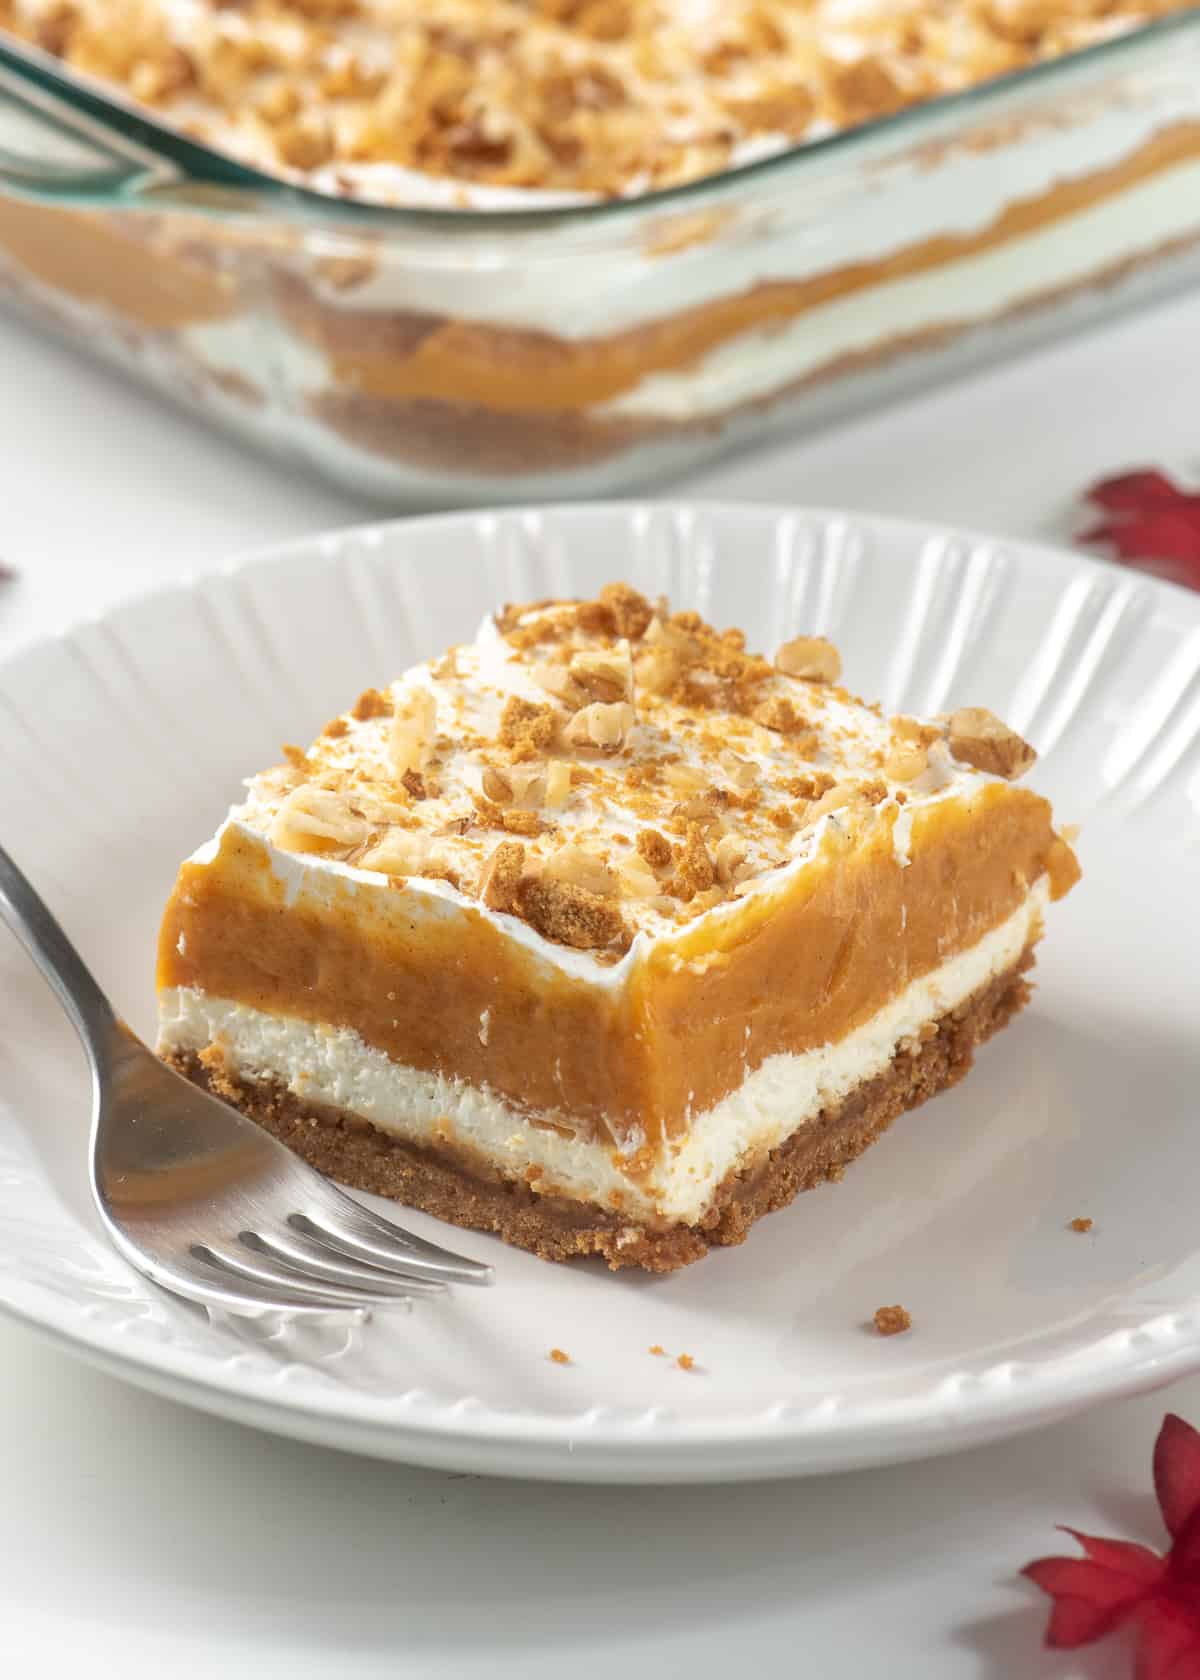 A slice of layered pumpkin dessert on a white plate with a fork.